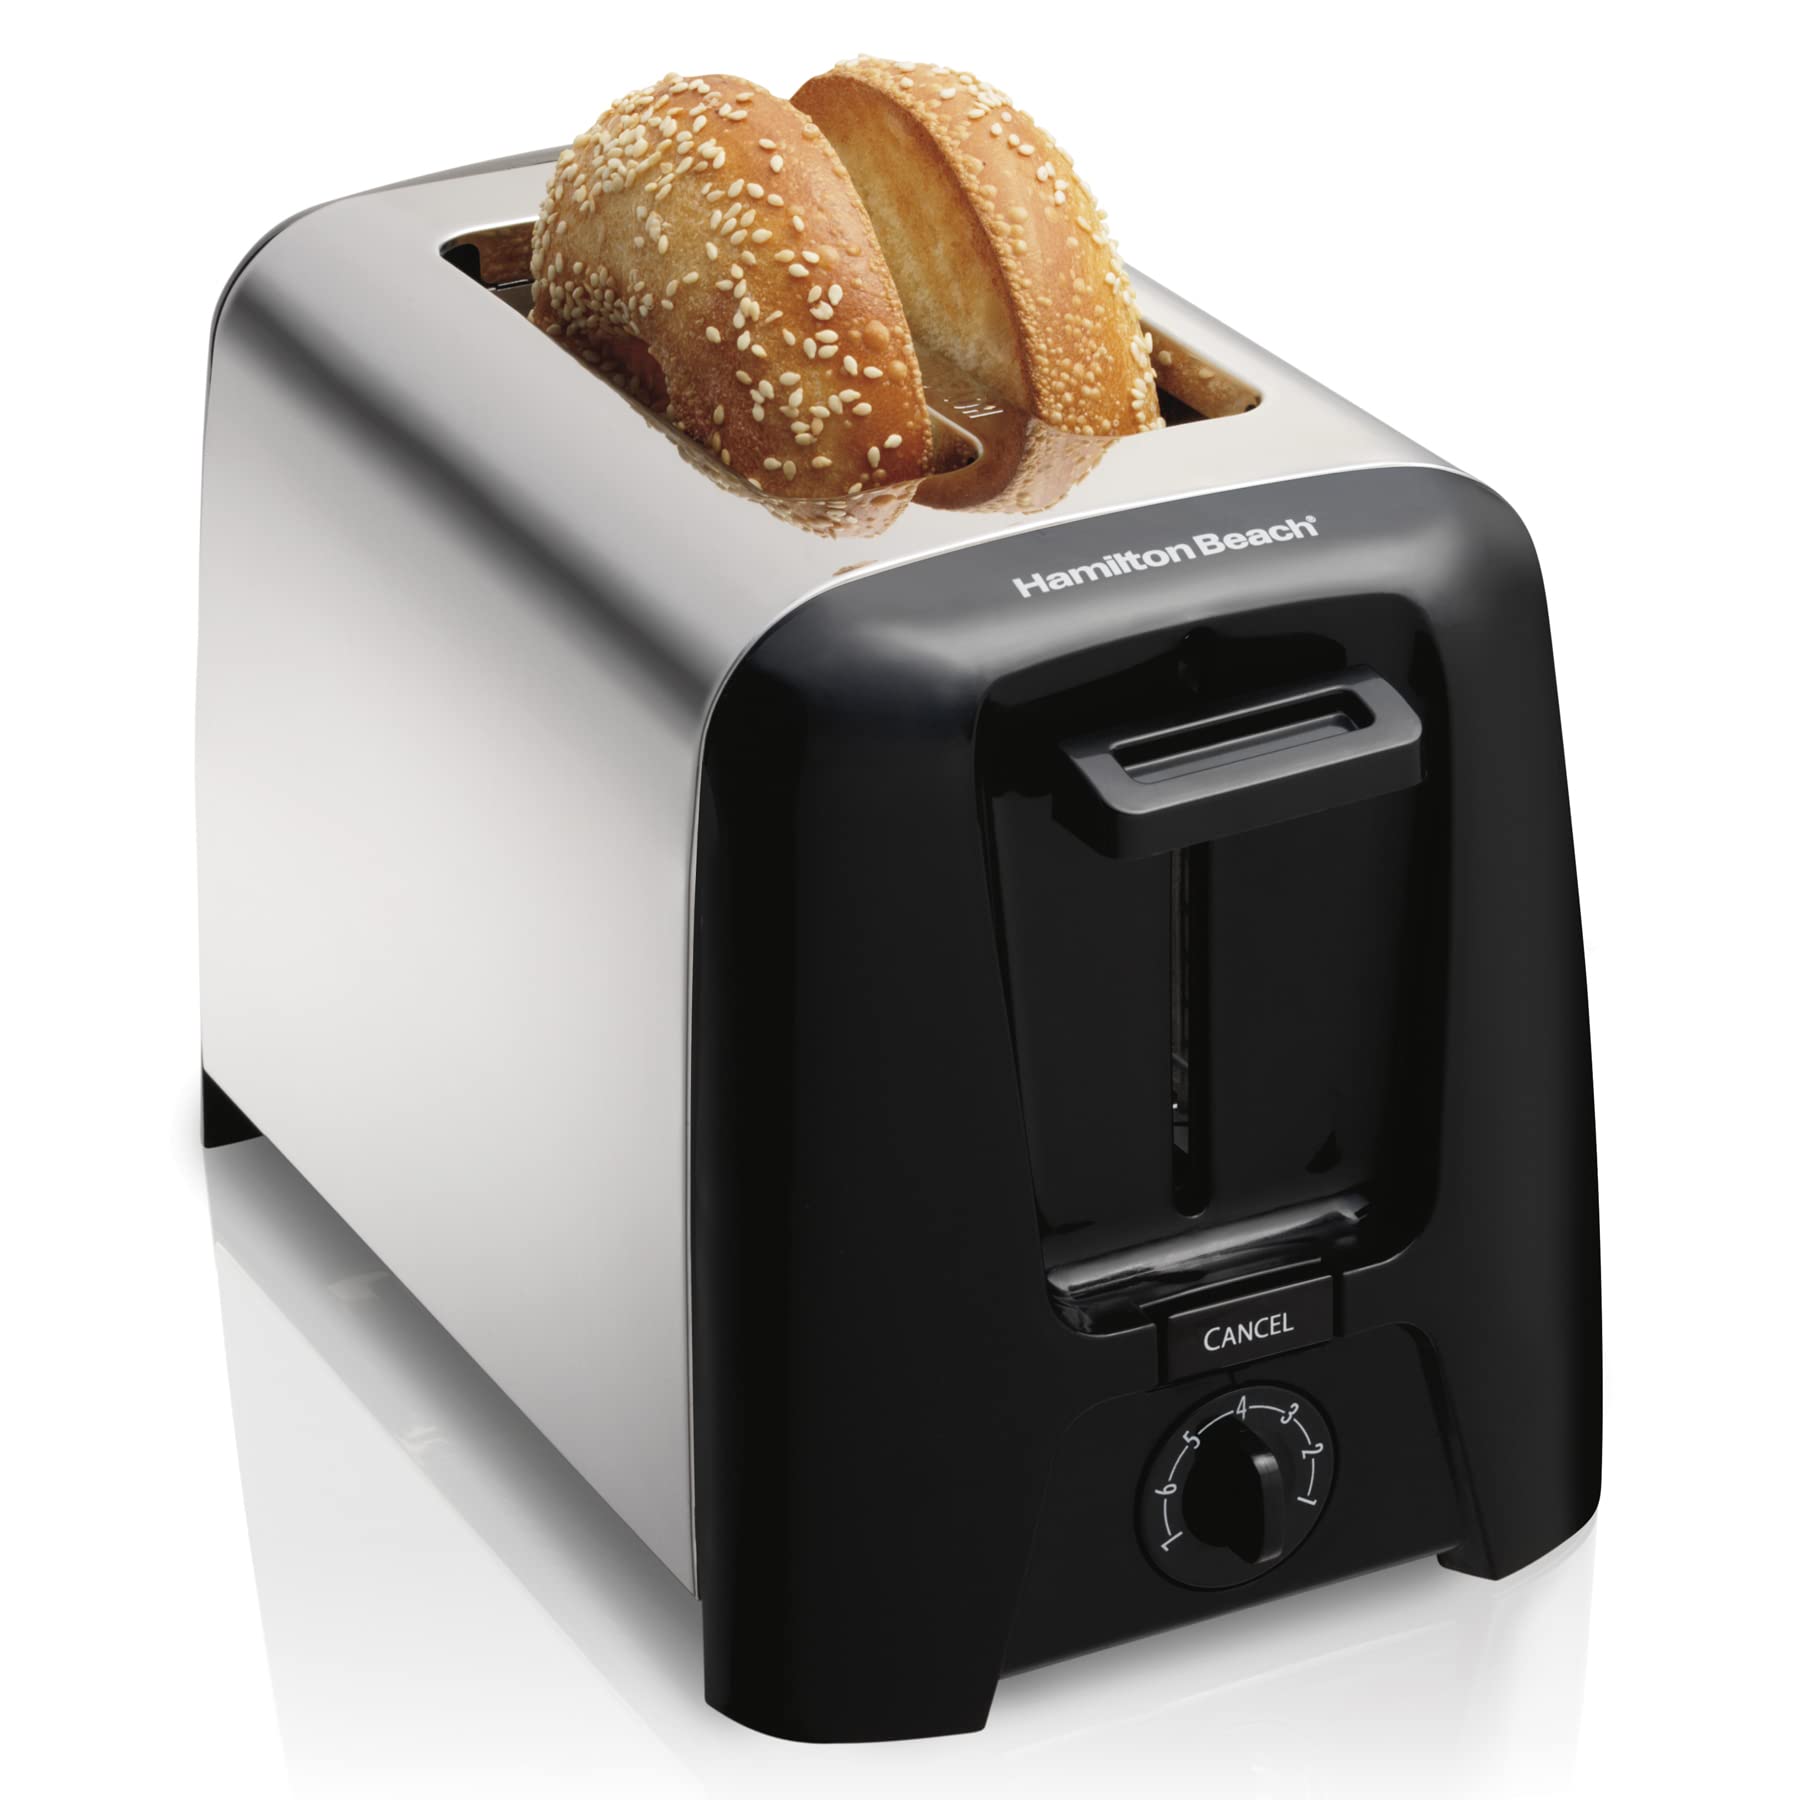 Hamilton Beach Wave Crusher Blender, Black (54220) & 2 Slice Extra Wide  Slot Toaster with Shade Selector, Toast Boost, Auto Shutoff, Black (22633)